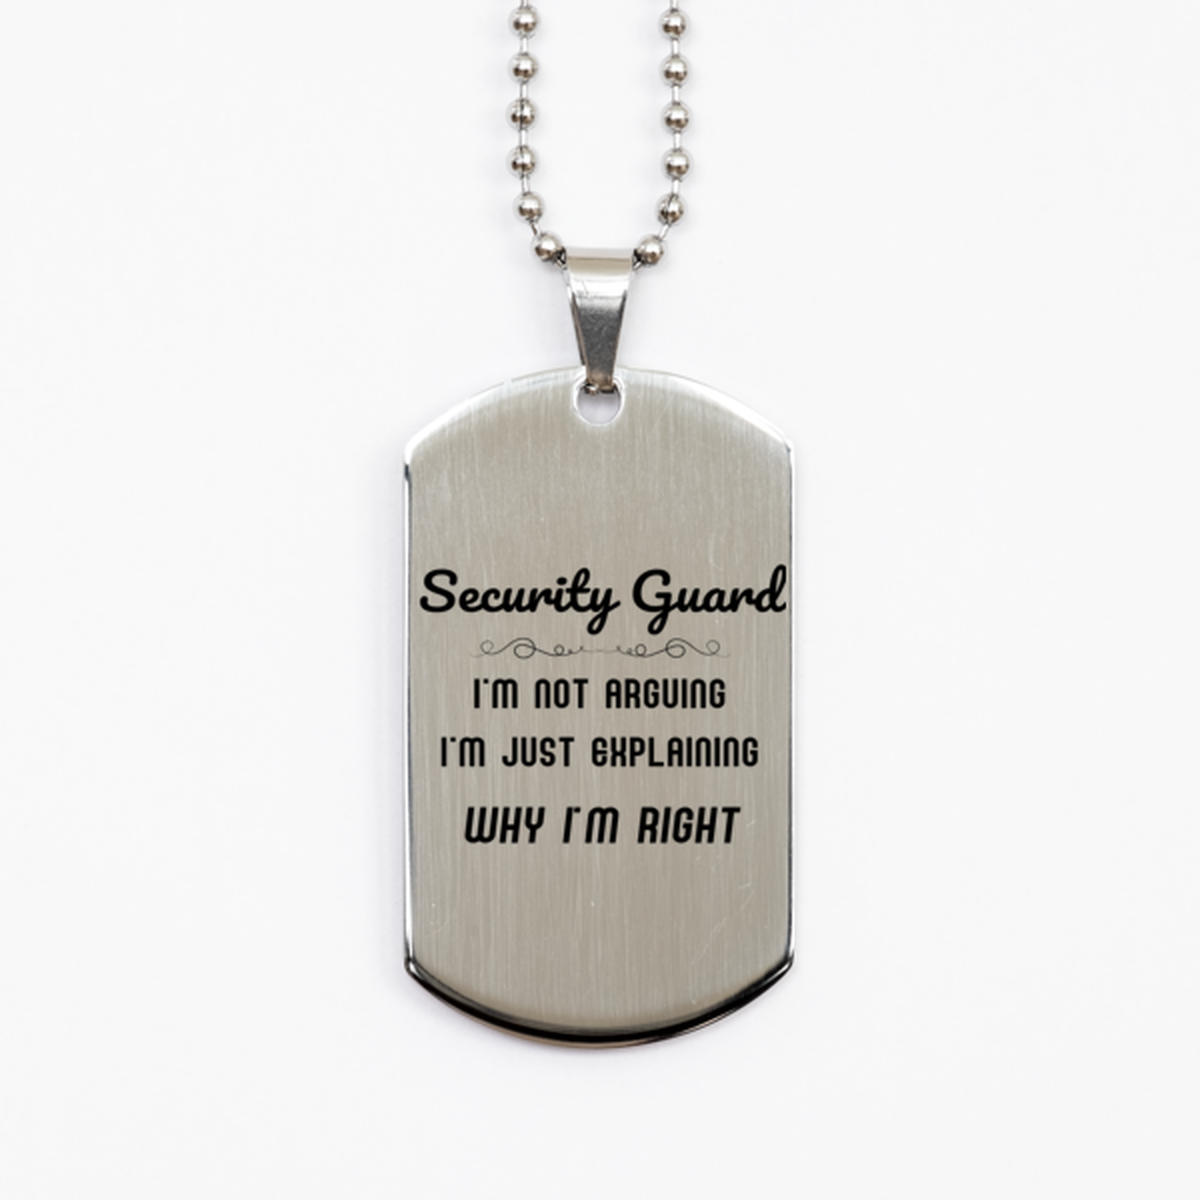 Security Guard I'm not Arguing. I'm Just Explaining Why I'm RIGHT Silver Dog Tag, Funny Saying Quote Security Guard Gifts For Security Guard Graduation Birthday Christmas Gifts for Men Women Coworker